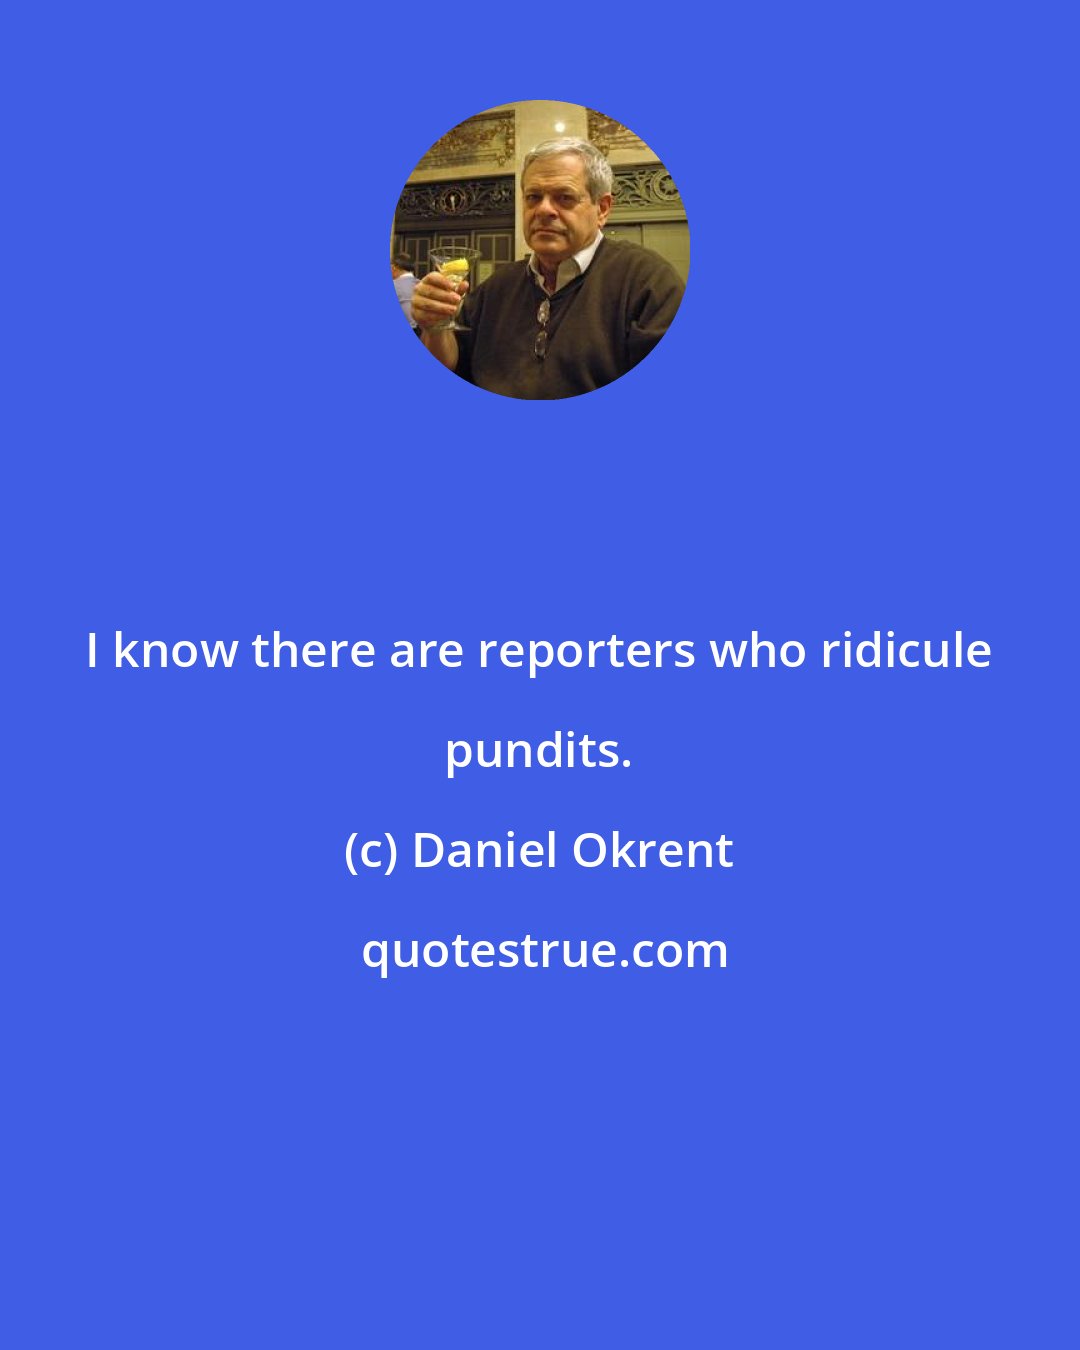 Daniel Okrent: I know there are reporters who ridicule pundits.